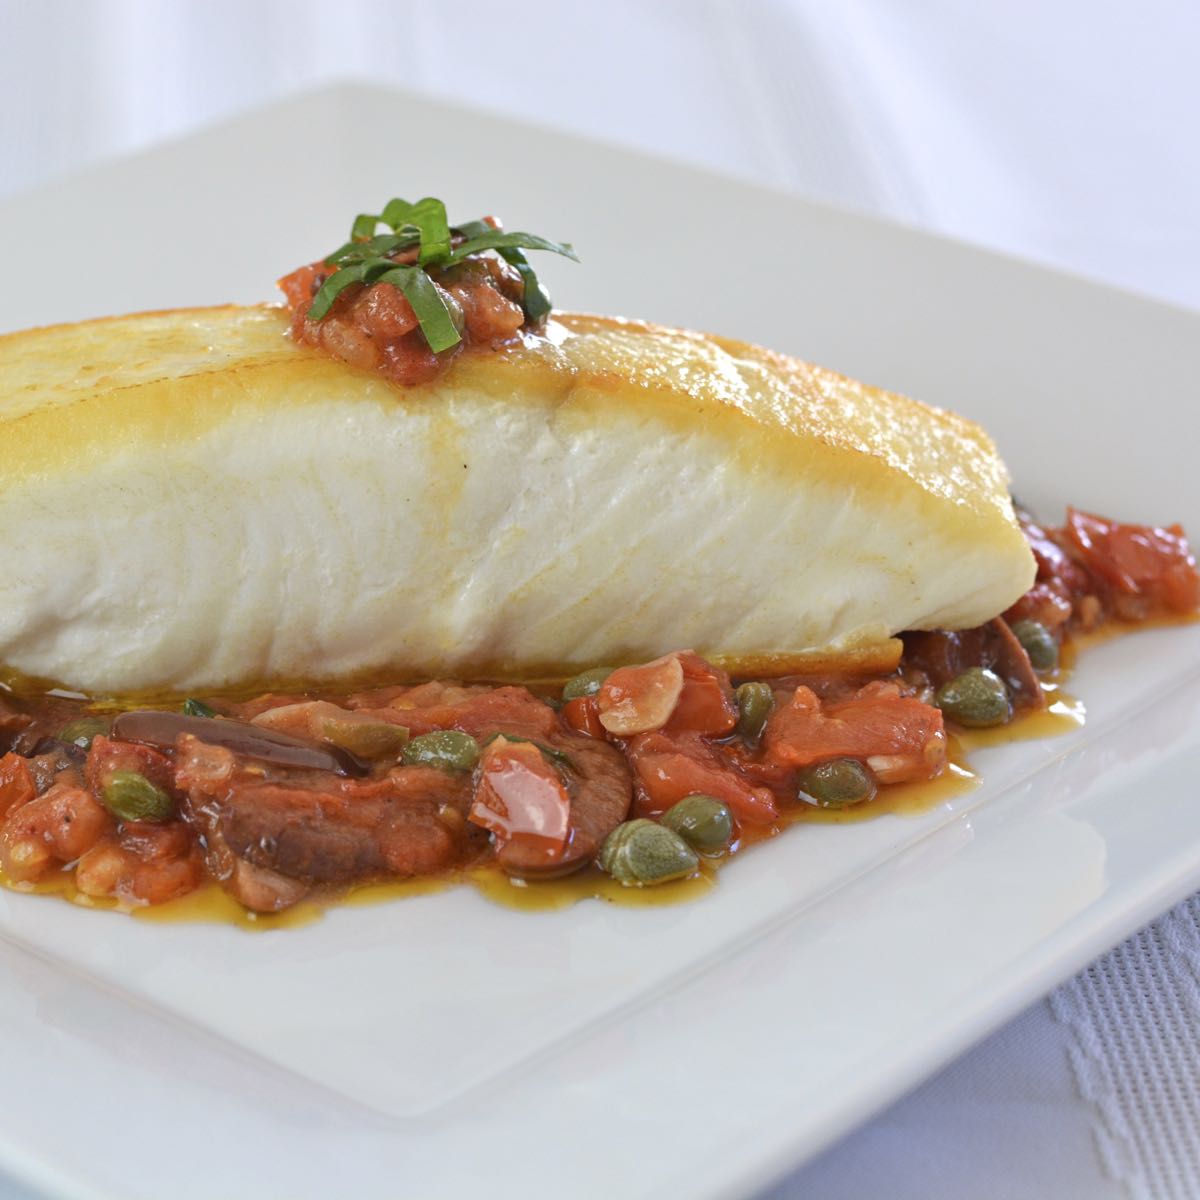 A fillet of golden crusted halibut topped with a fresh puttanesca sauce.